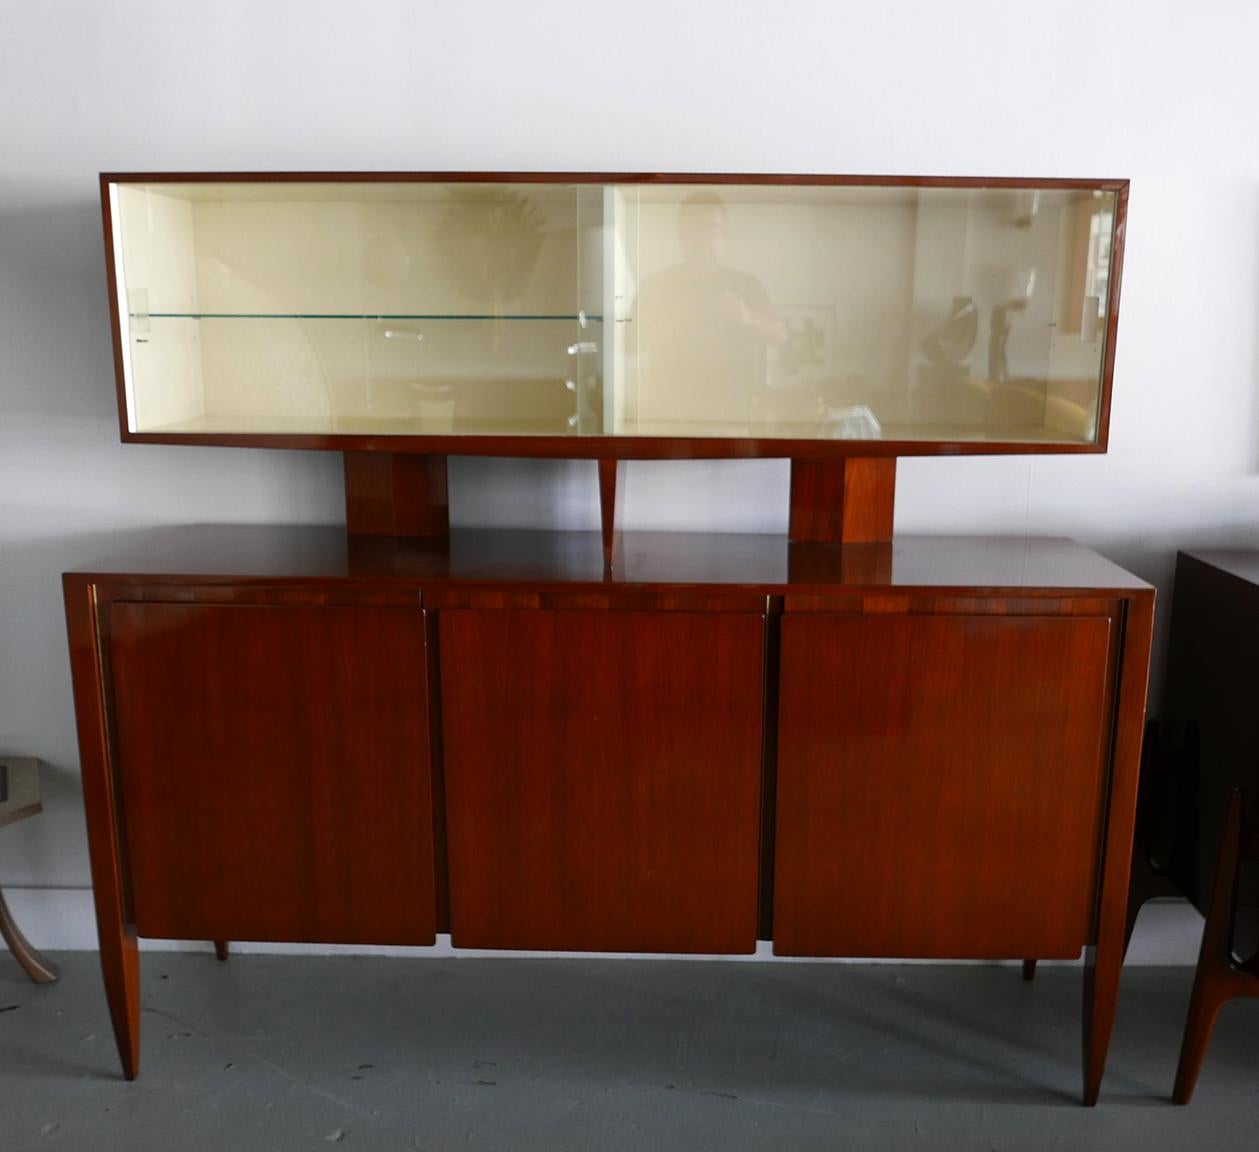 Mid-Century Modern Italian Modern Walnut Cabinet by Gio Ponti for M. Singer & Sons For Sale